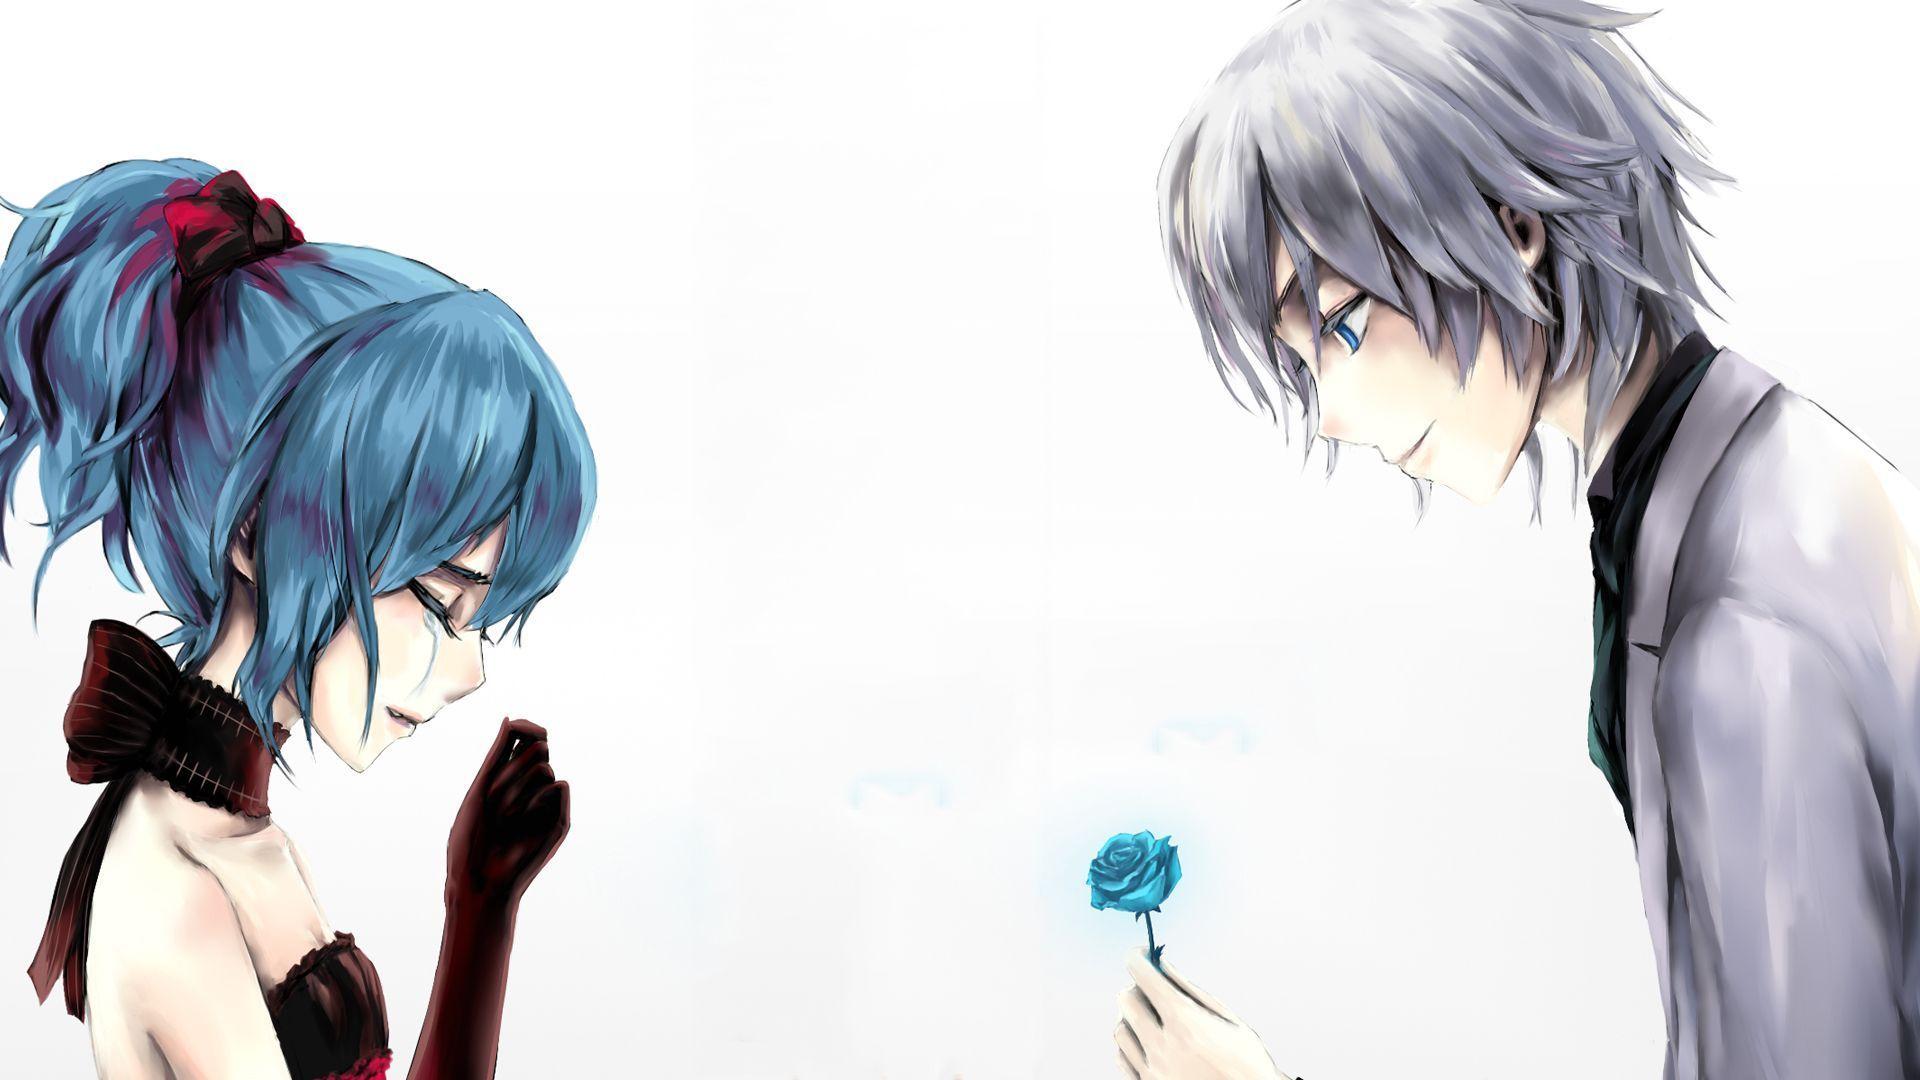 Anime Love Couple Boy Giving Rose to Cry Girl Wallpaper